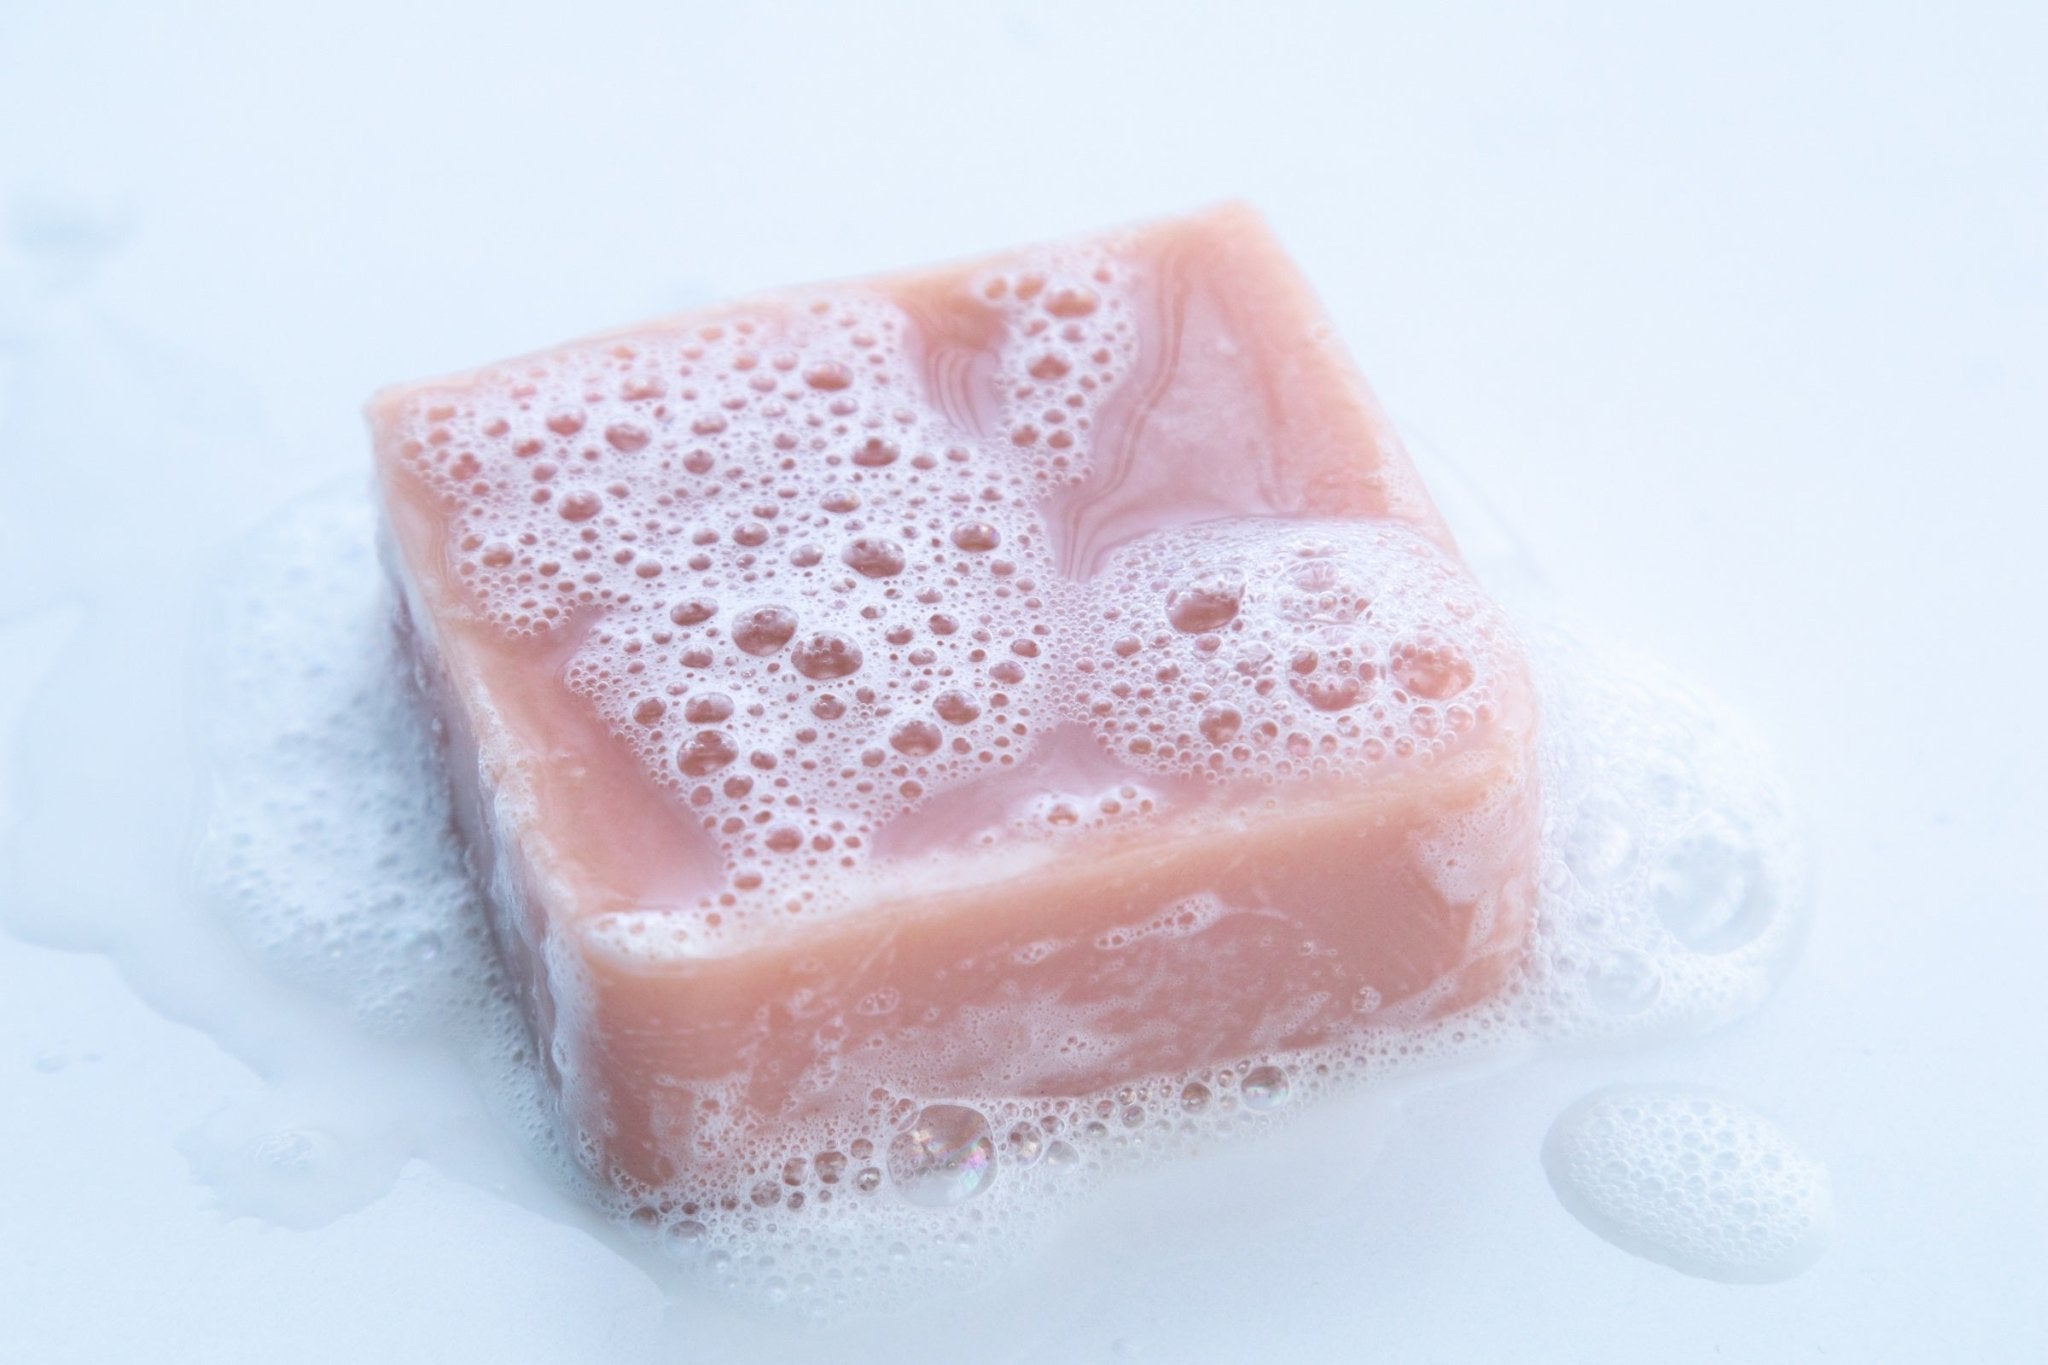 CBD Bath Soaps: How To Find Quality Suds - Tub Therapy